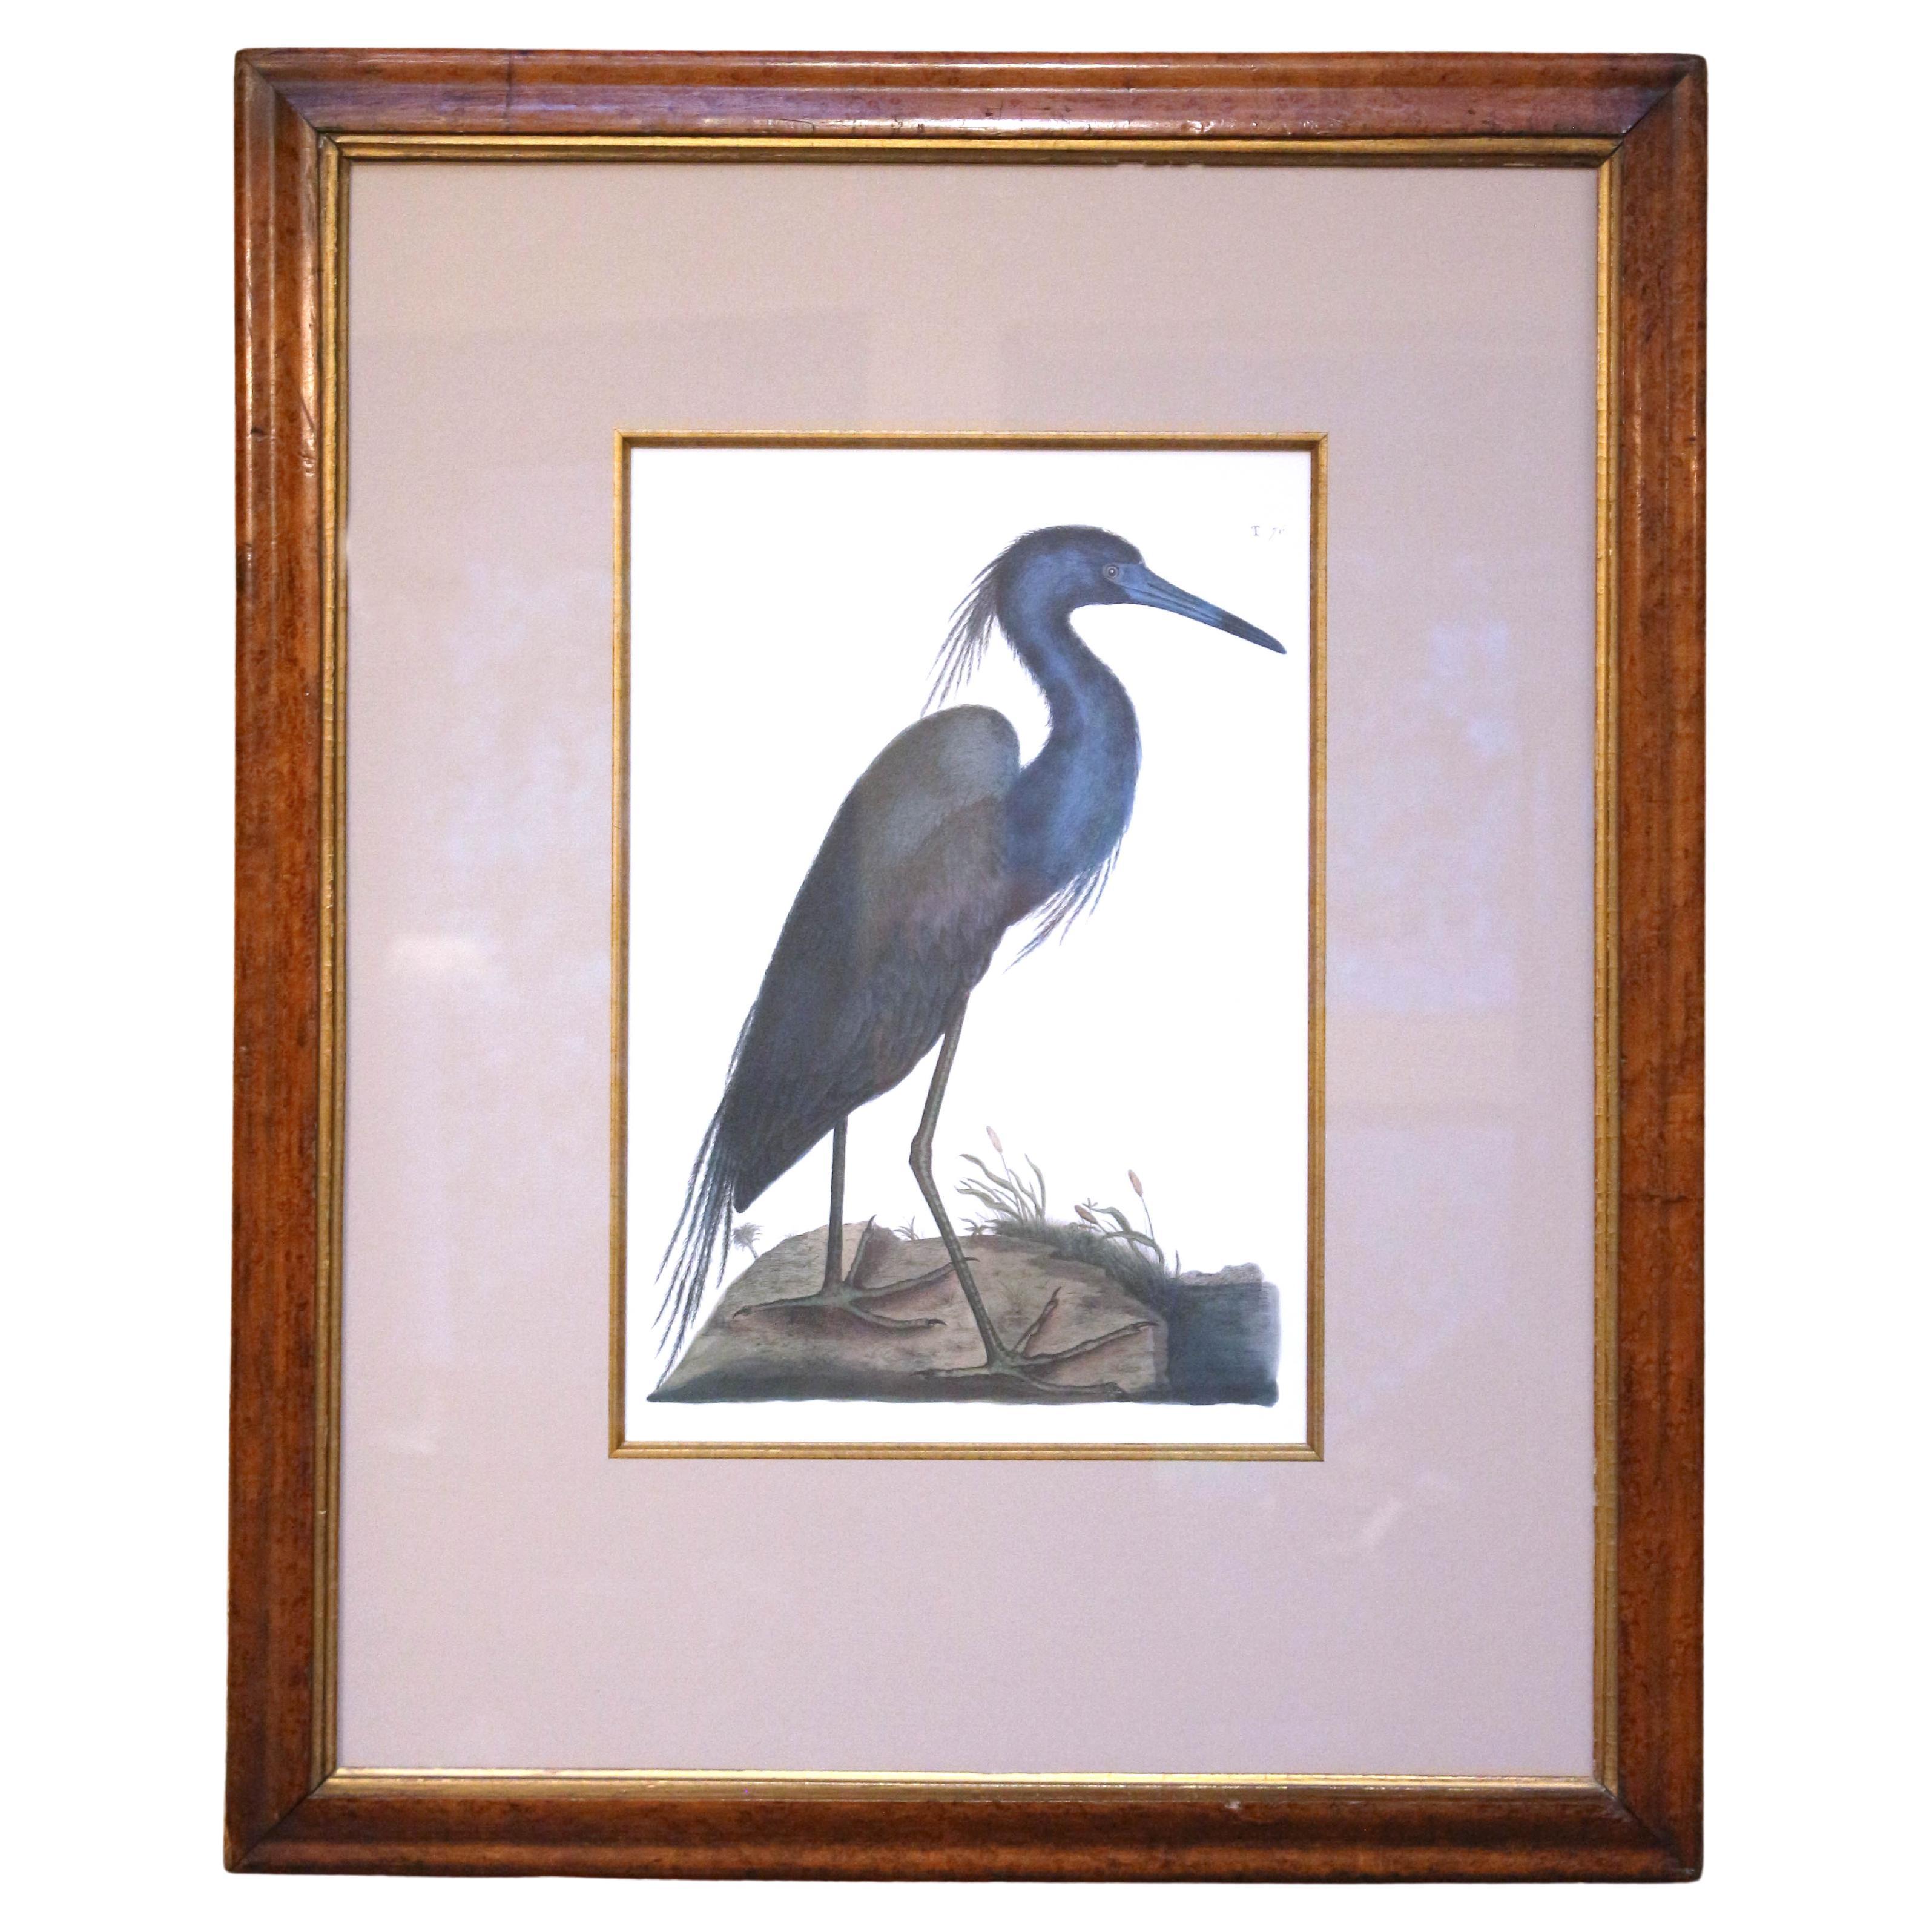 20th Century "The Blue Heron" Print, a Copy of the Engraving by Mark Catesby